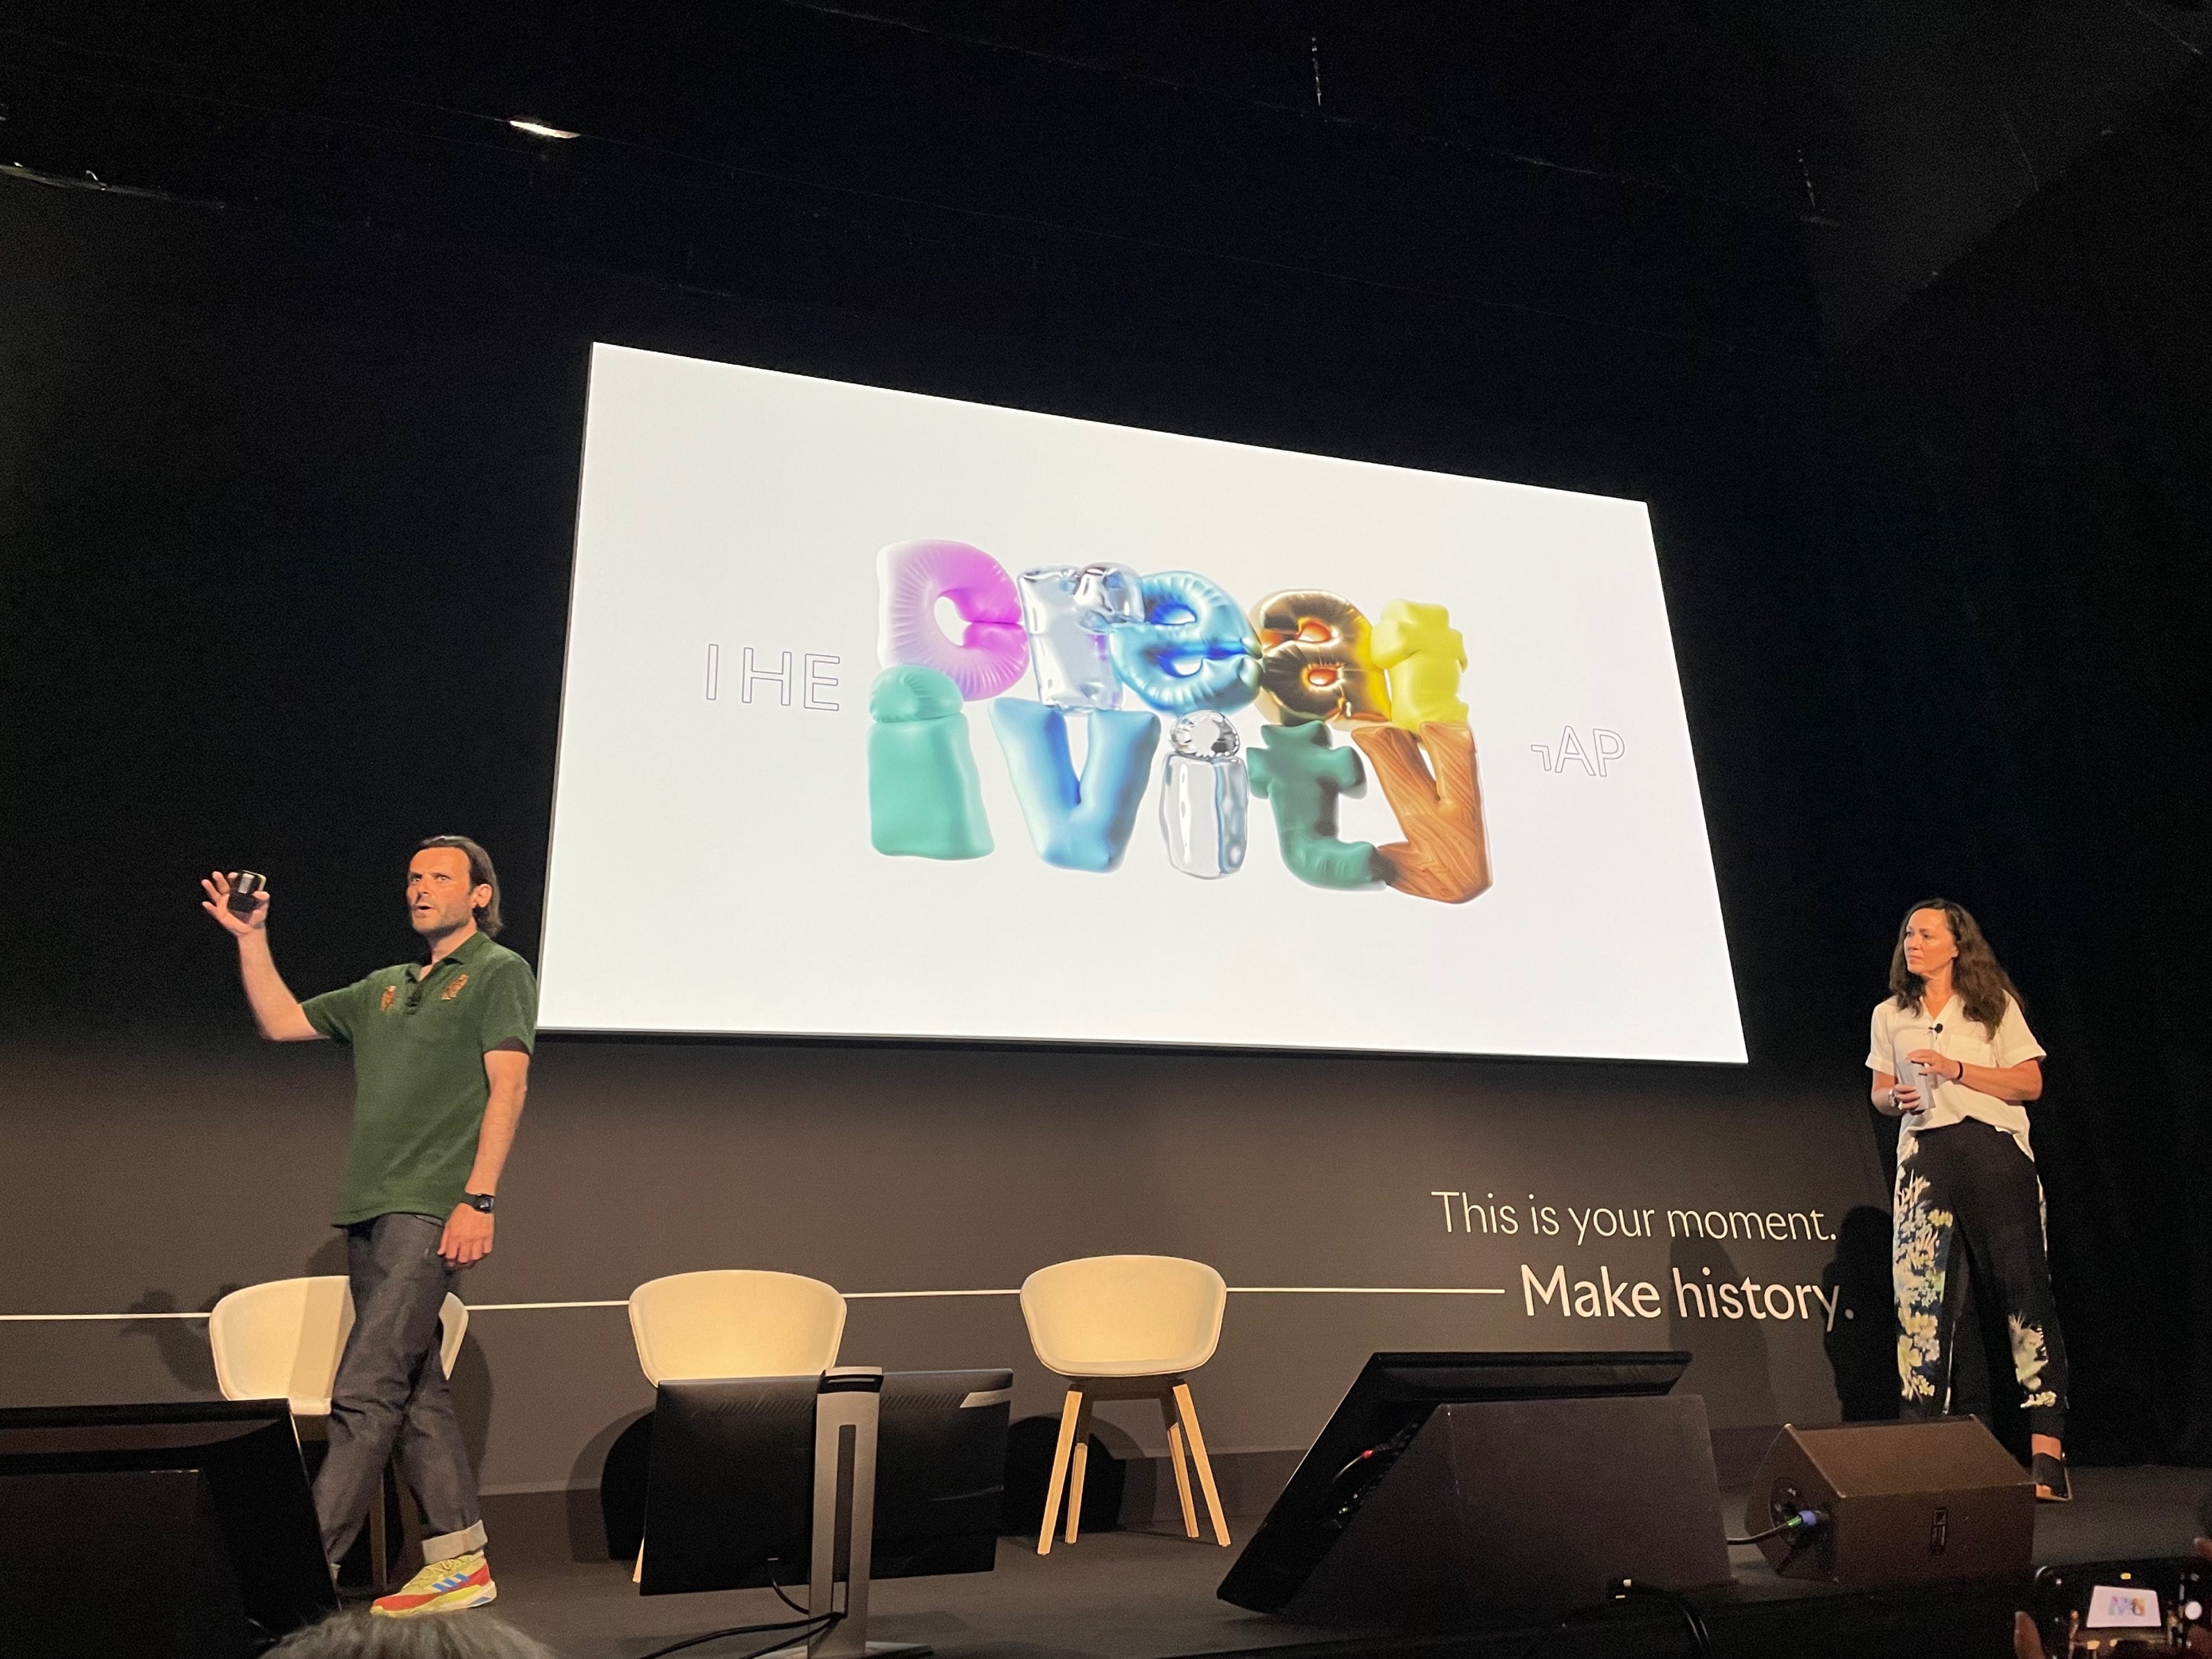 Sandoz and Sims presenting at Cannes Lions